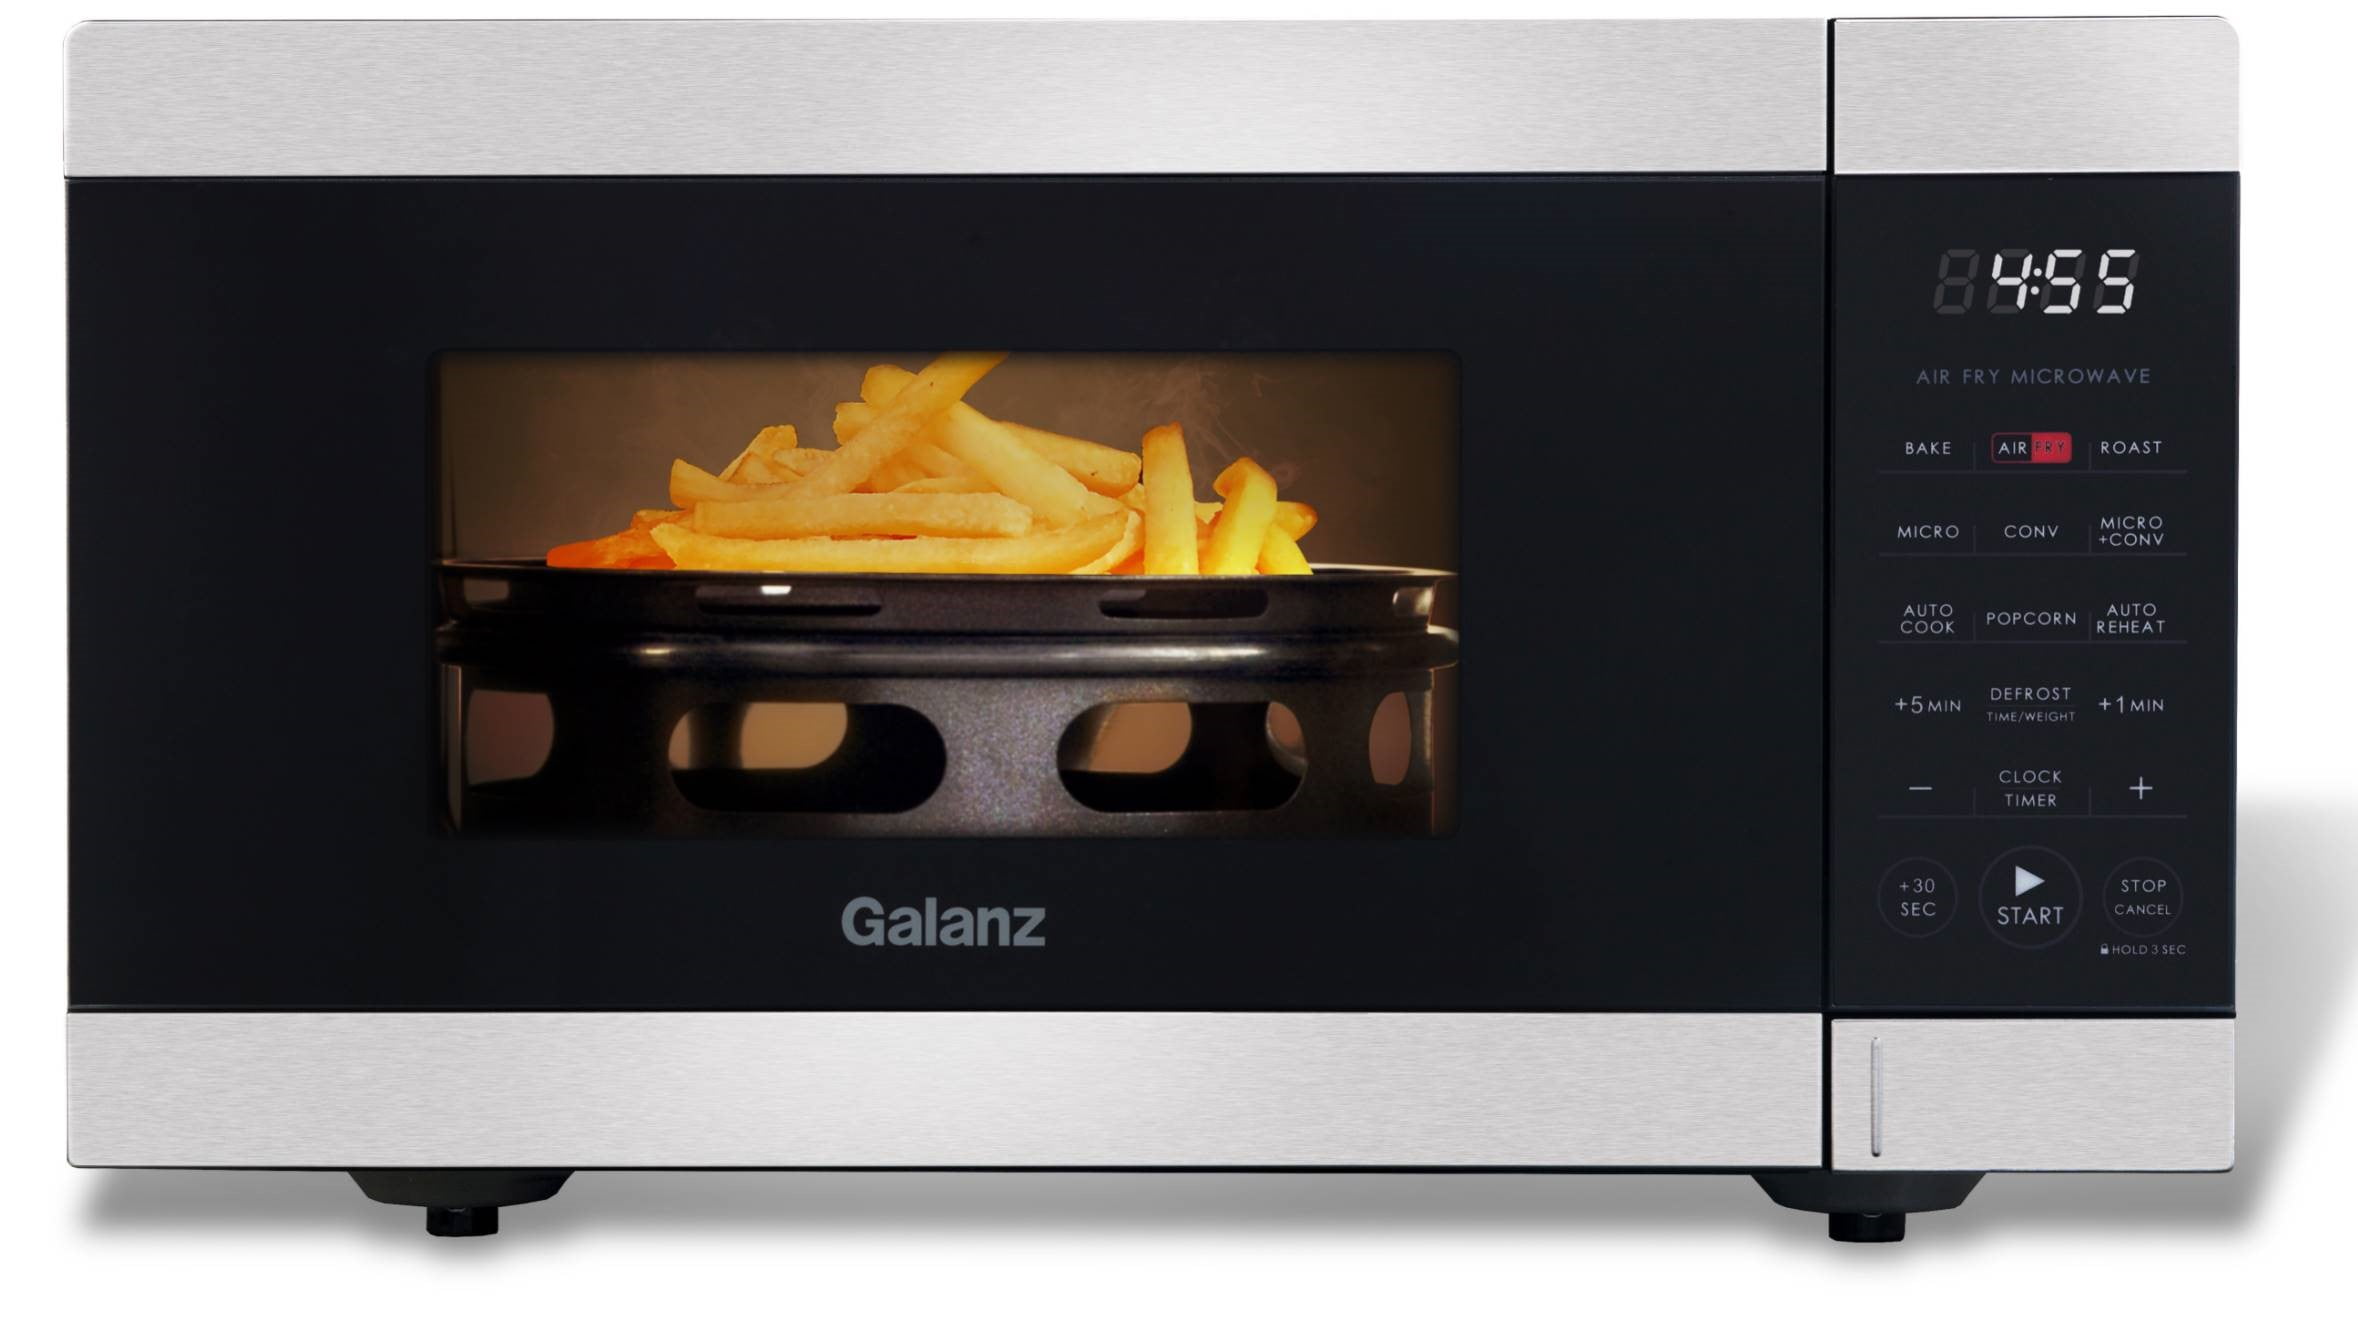 Air Fry Microwave  Take an expanded look at the Galanz Air Fry